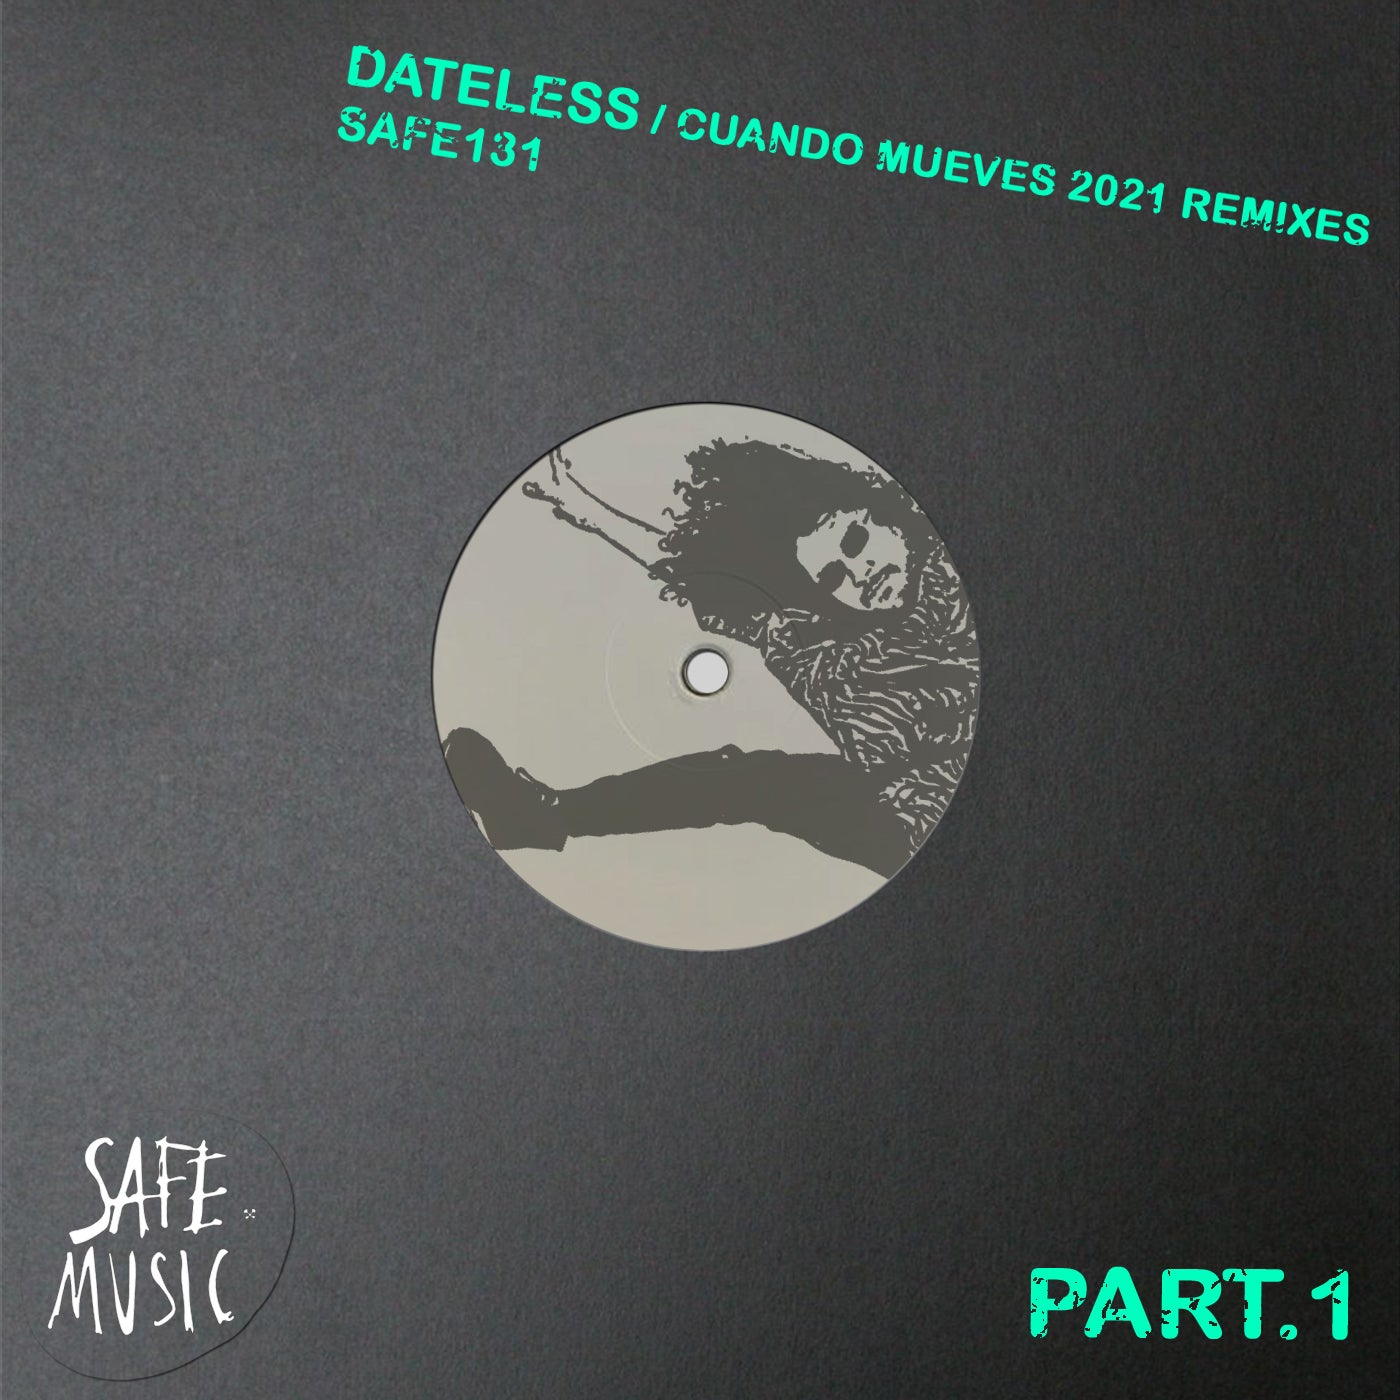 Dateless – Cuando Mueves 2021 – The Remixes (Part.1) (Incl. The Deepshakerz and Gettoblaster remixes)